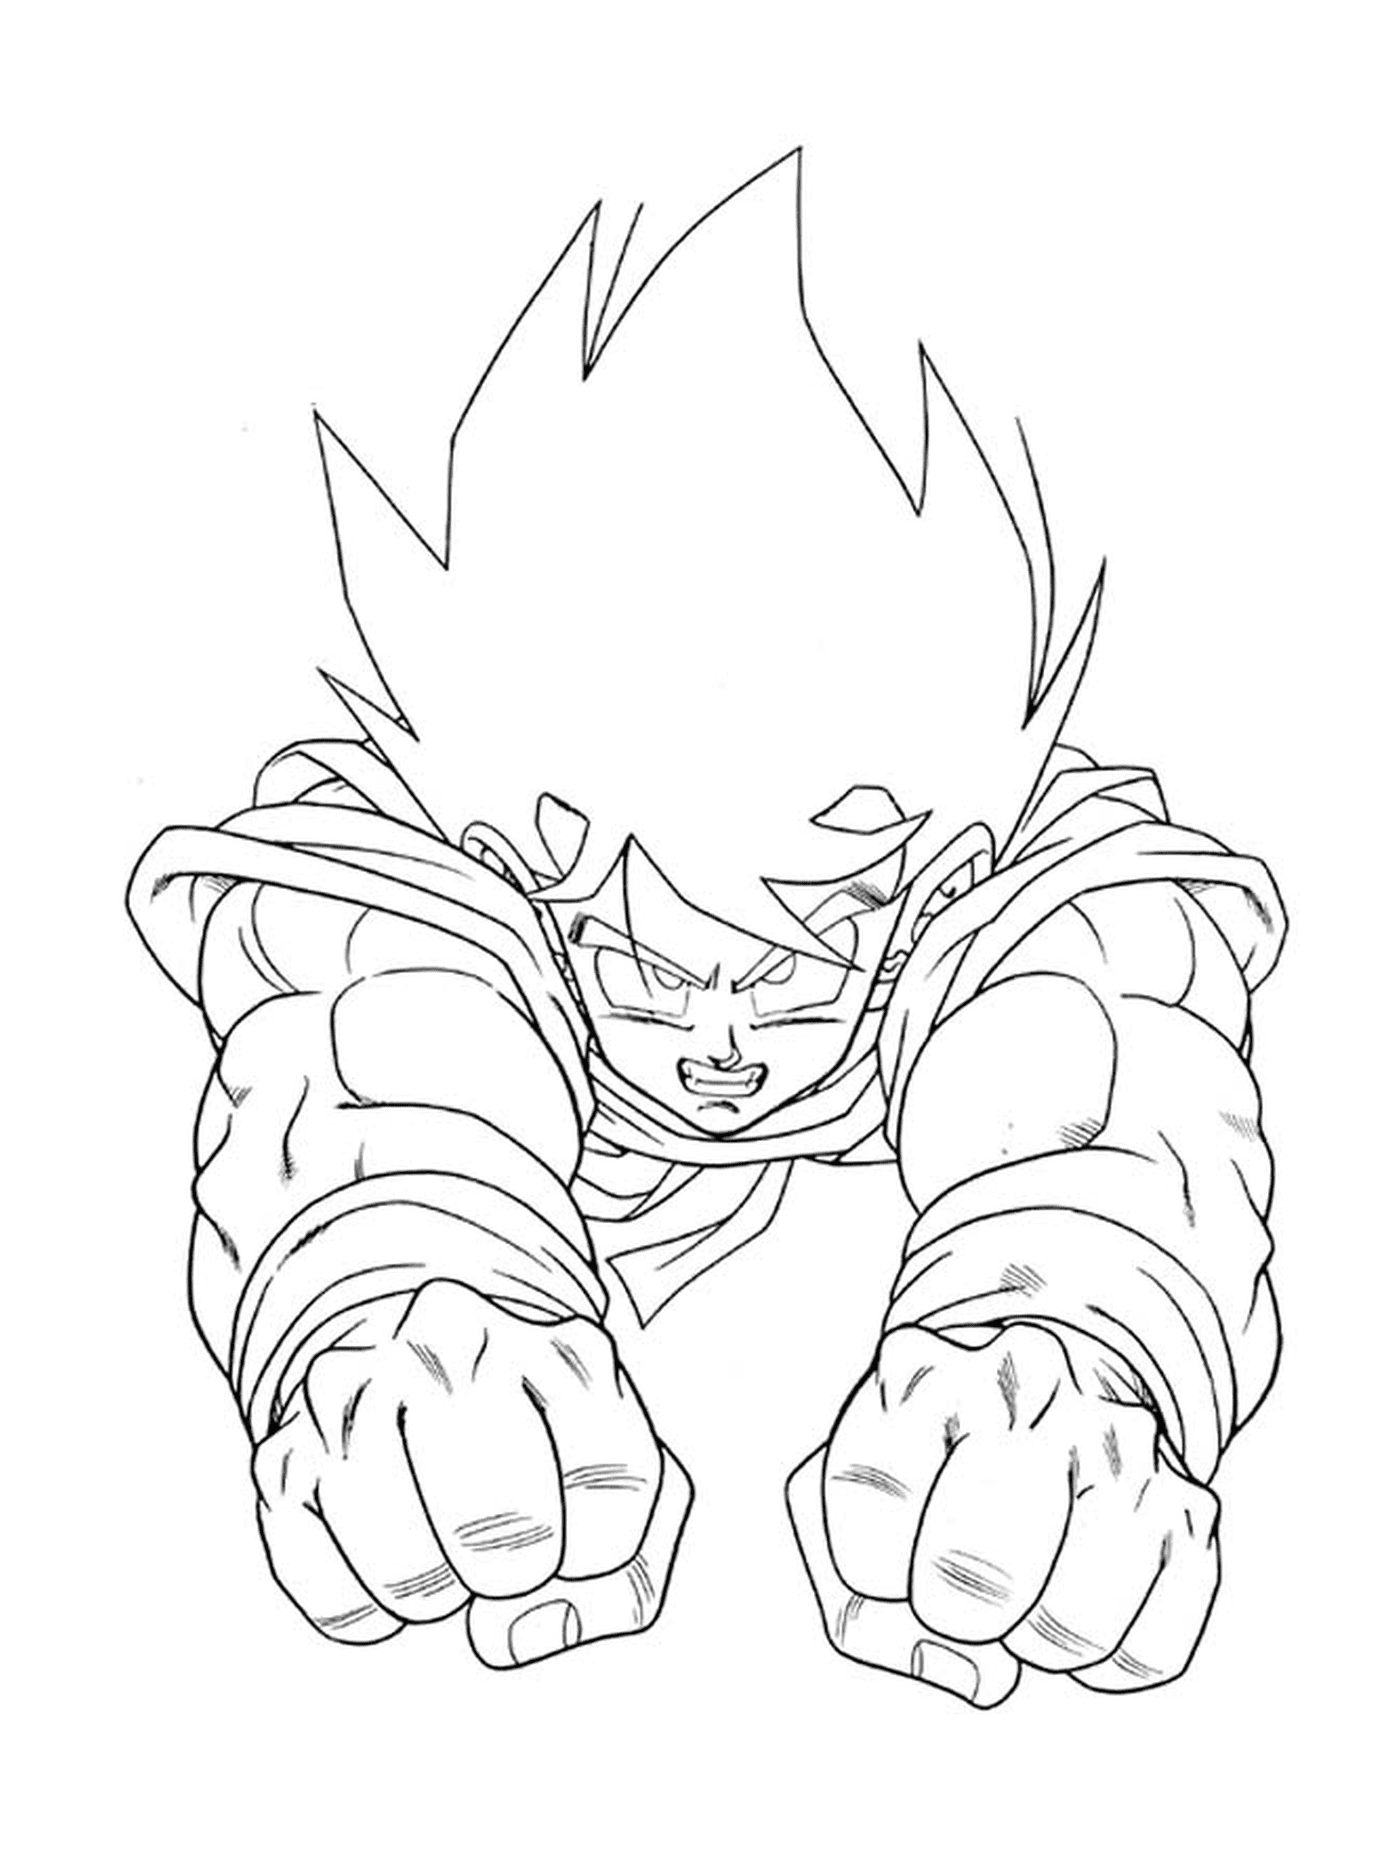  Character of Dragon Ball Z Powerful 